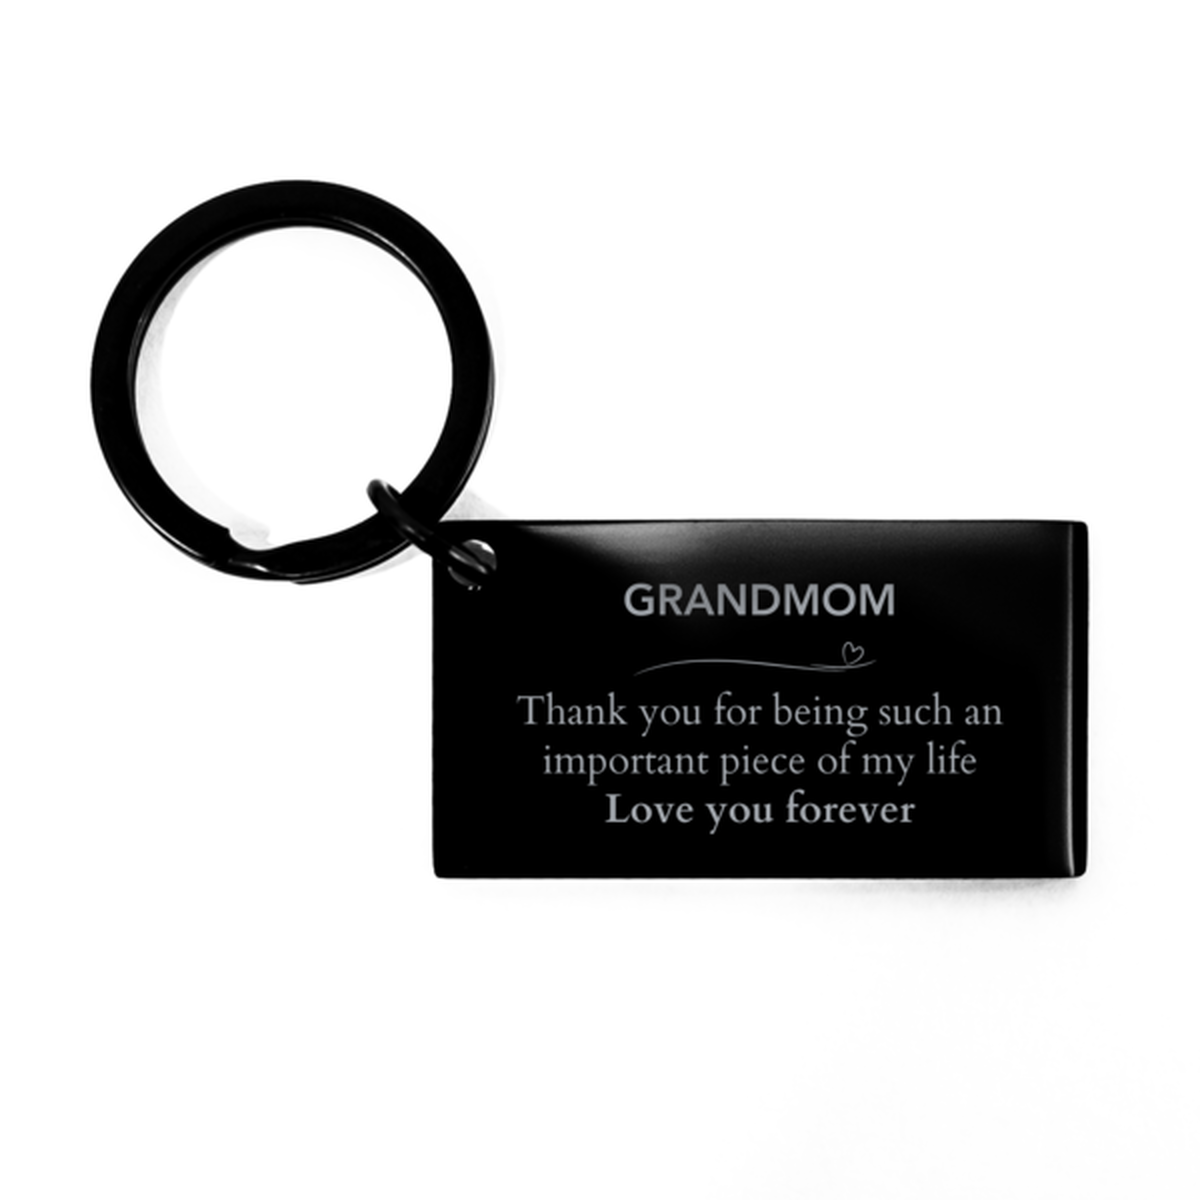 Appropriate Grandmom Keychain Epic Birthday Gifts for Grandmom Thank you for being such an important piece of my life Grandmom Christmas Mothers Fathers Day